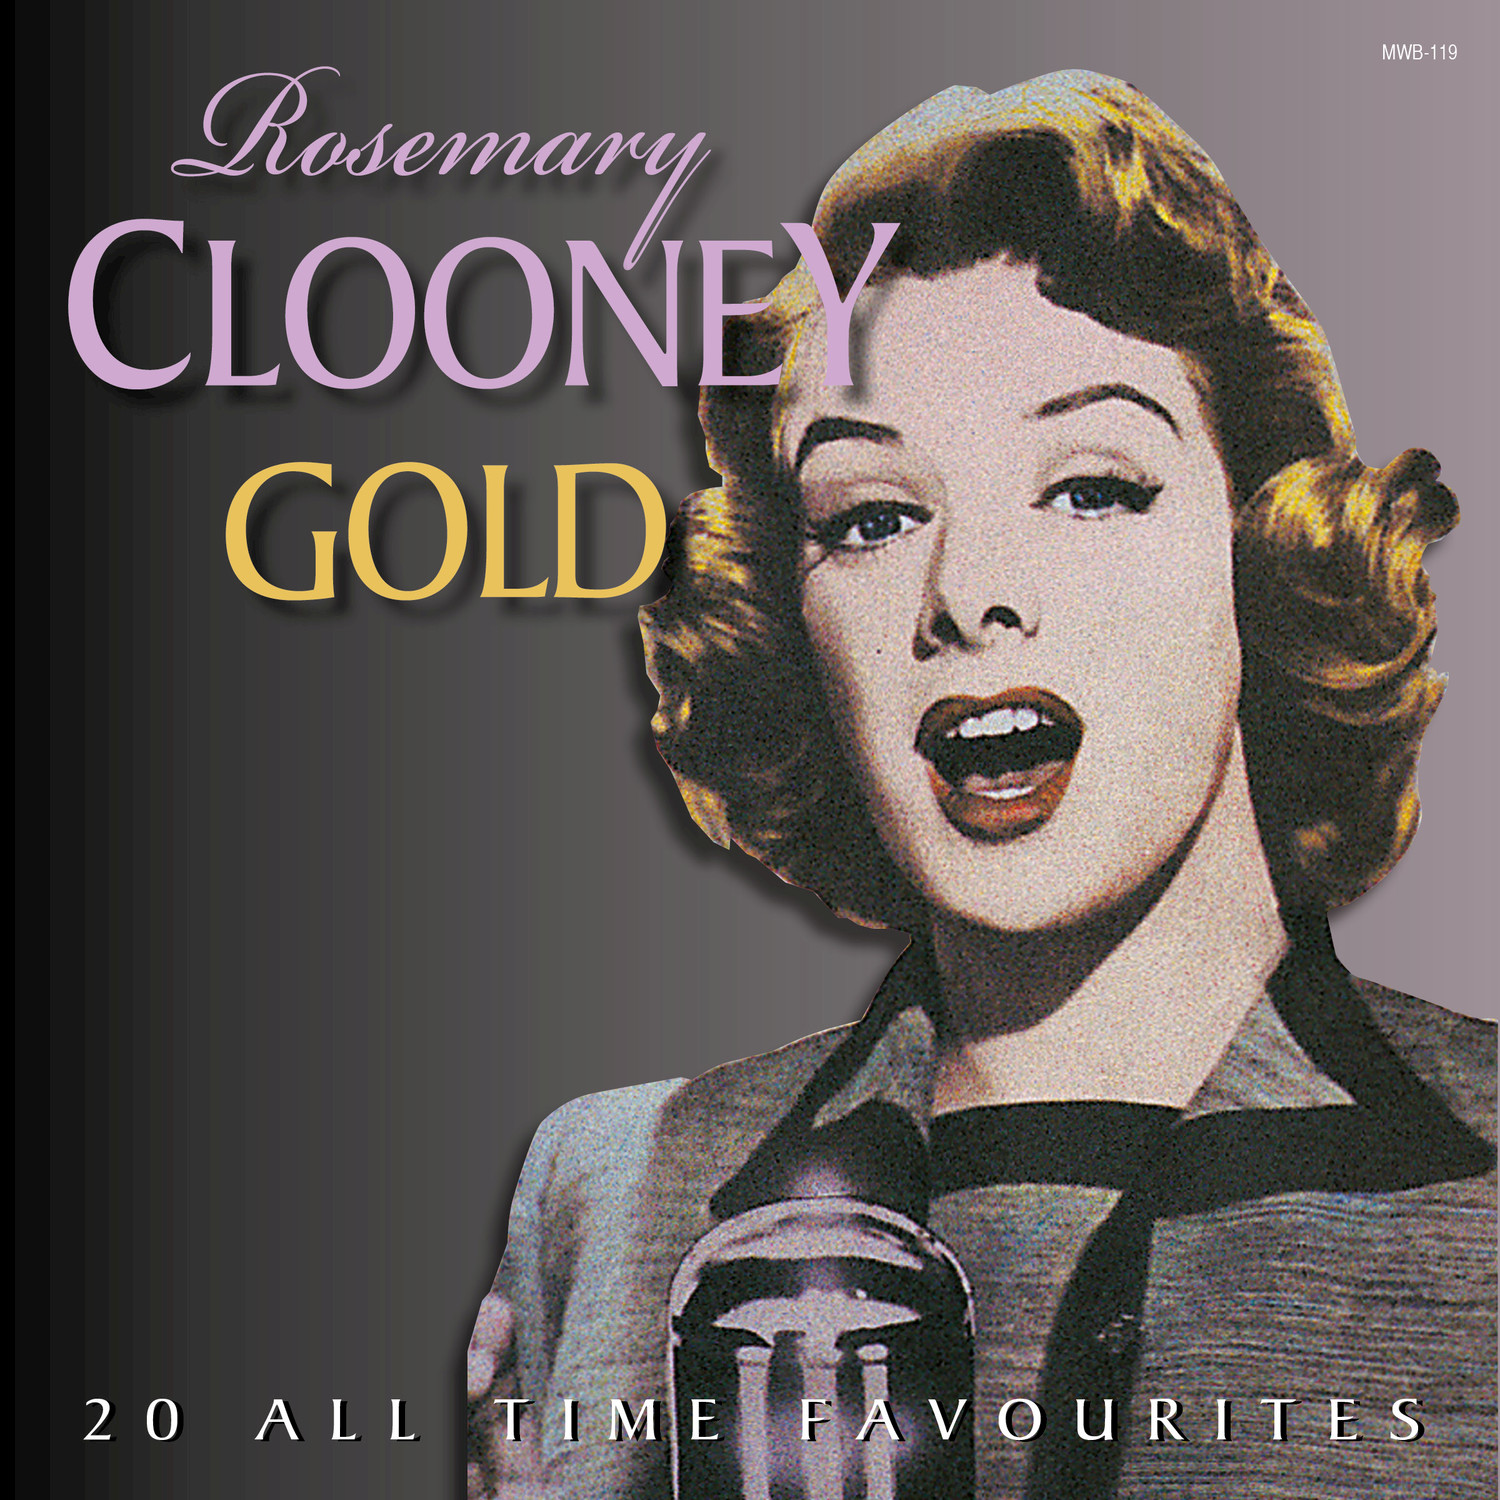 Rosemary Clooney Gold - 20 All Time Favourites